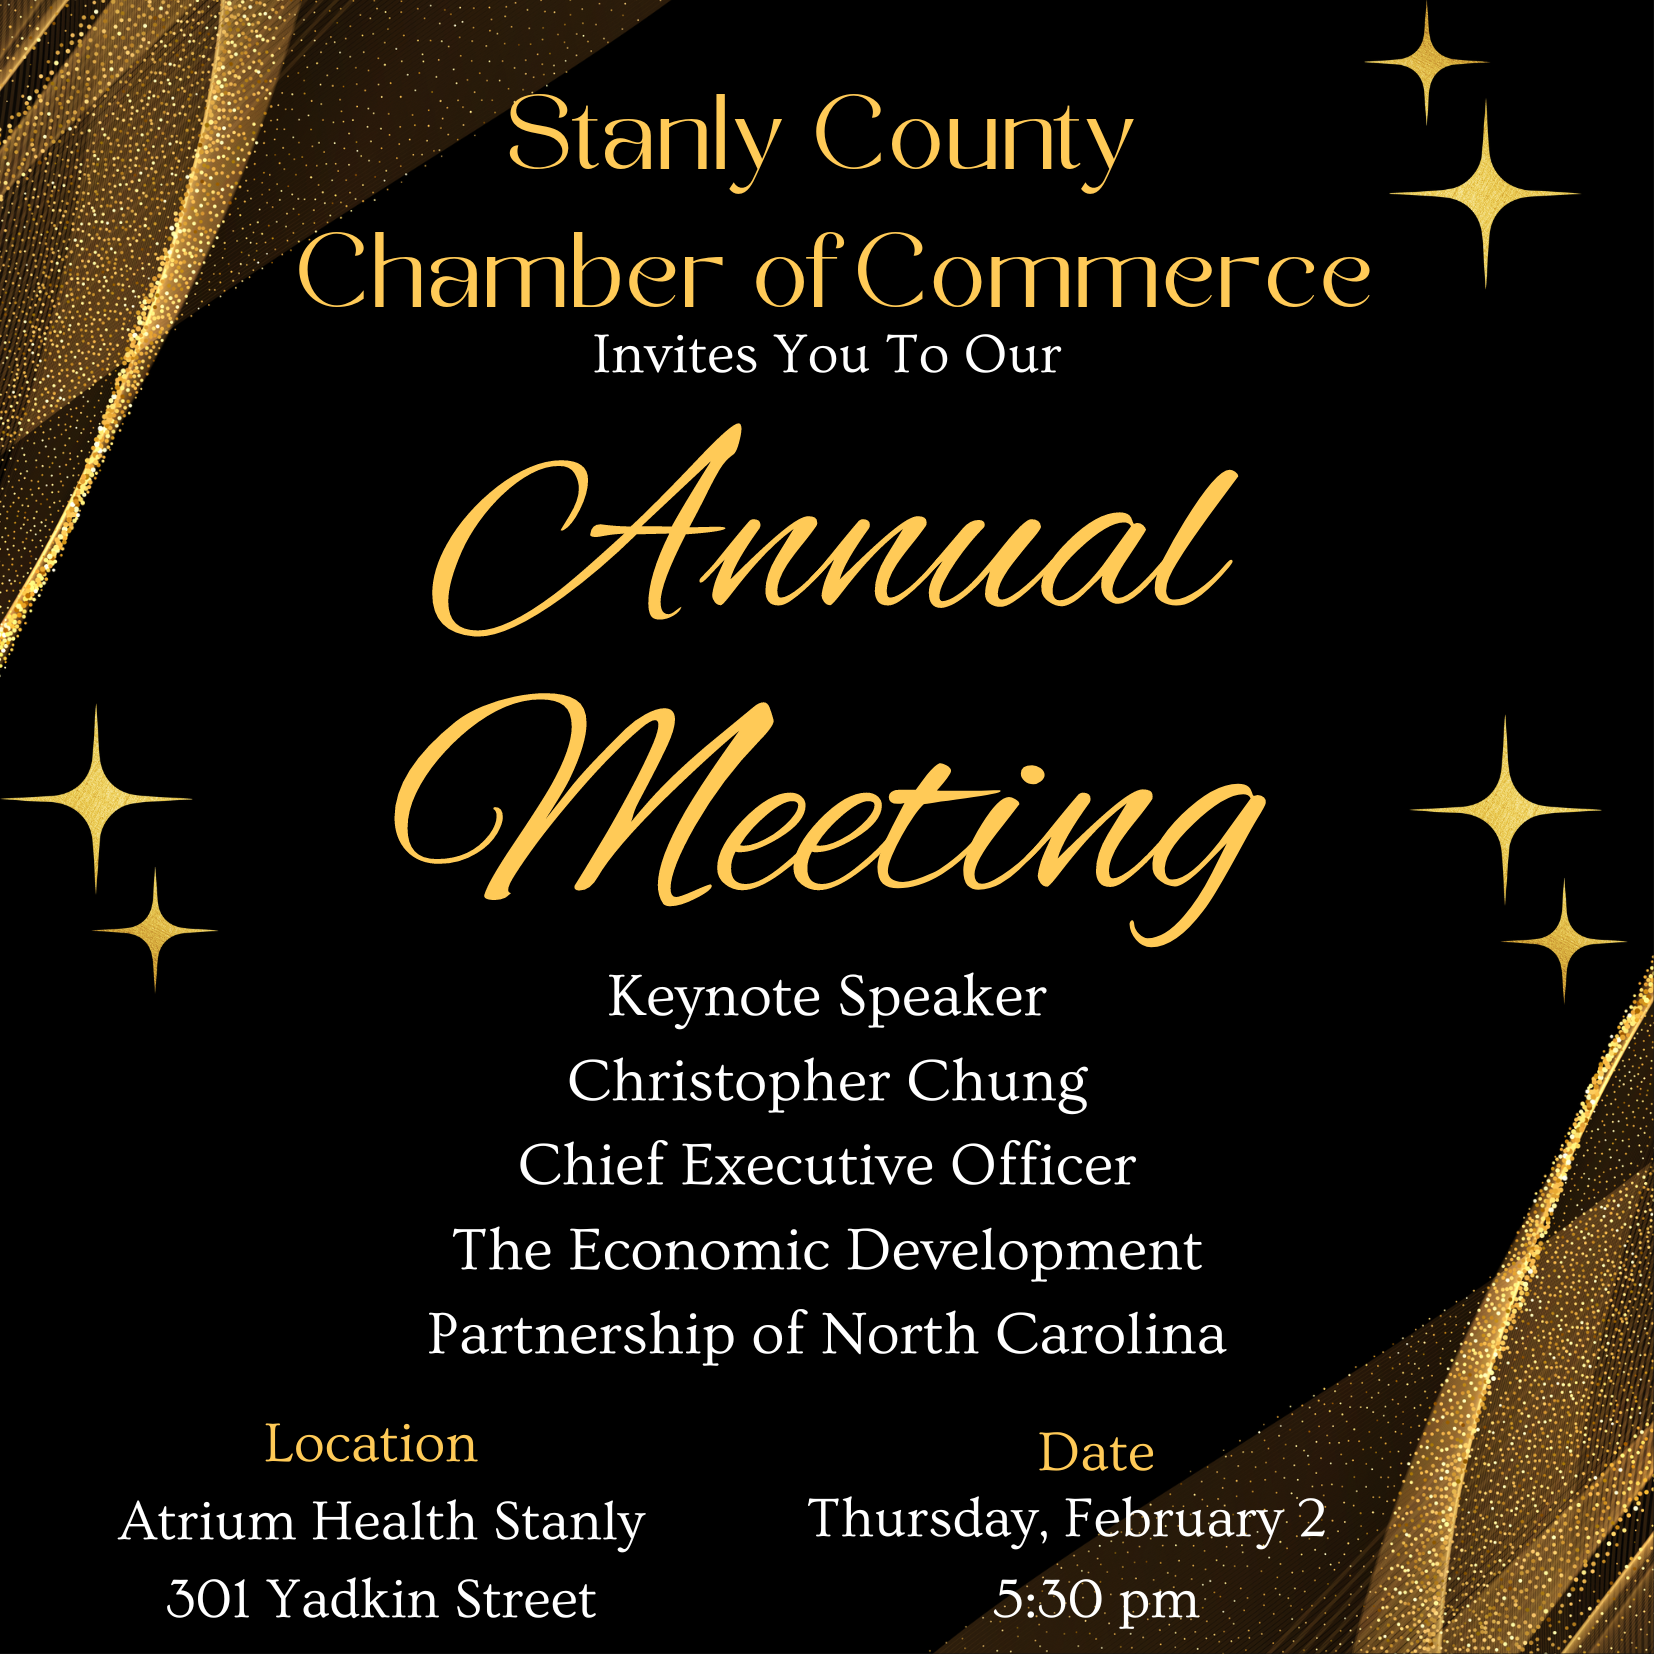 Stanly County Chamber of Commerce Annual Meeting